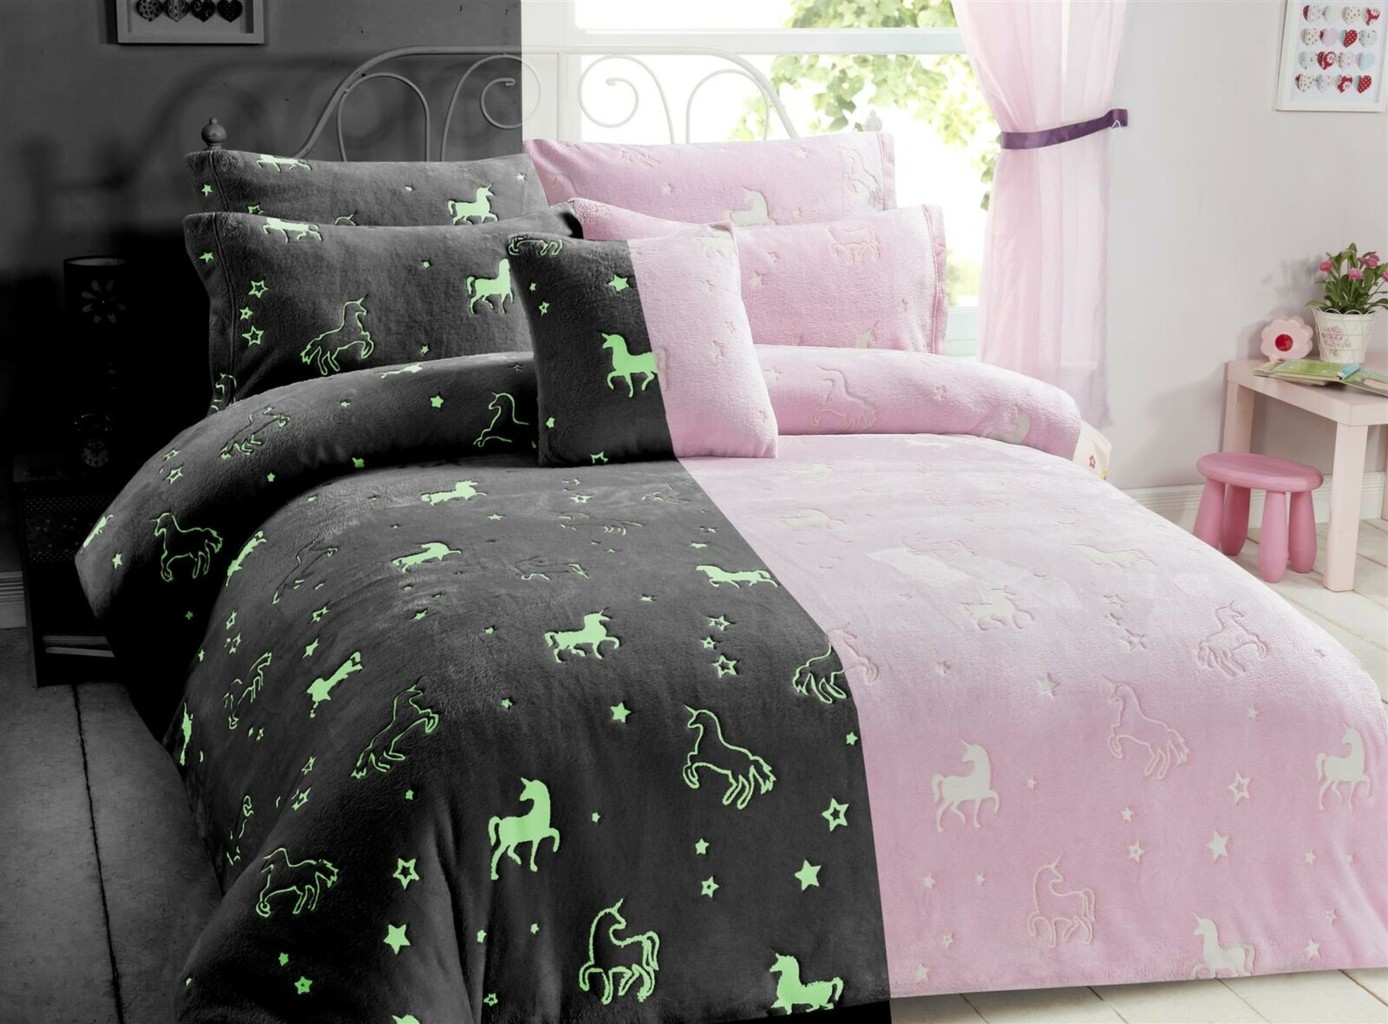 Teddy Unicorn Fleece Duvet Cover Quilt Cover Thermal Warm Soft Bedding All Size 